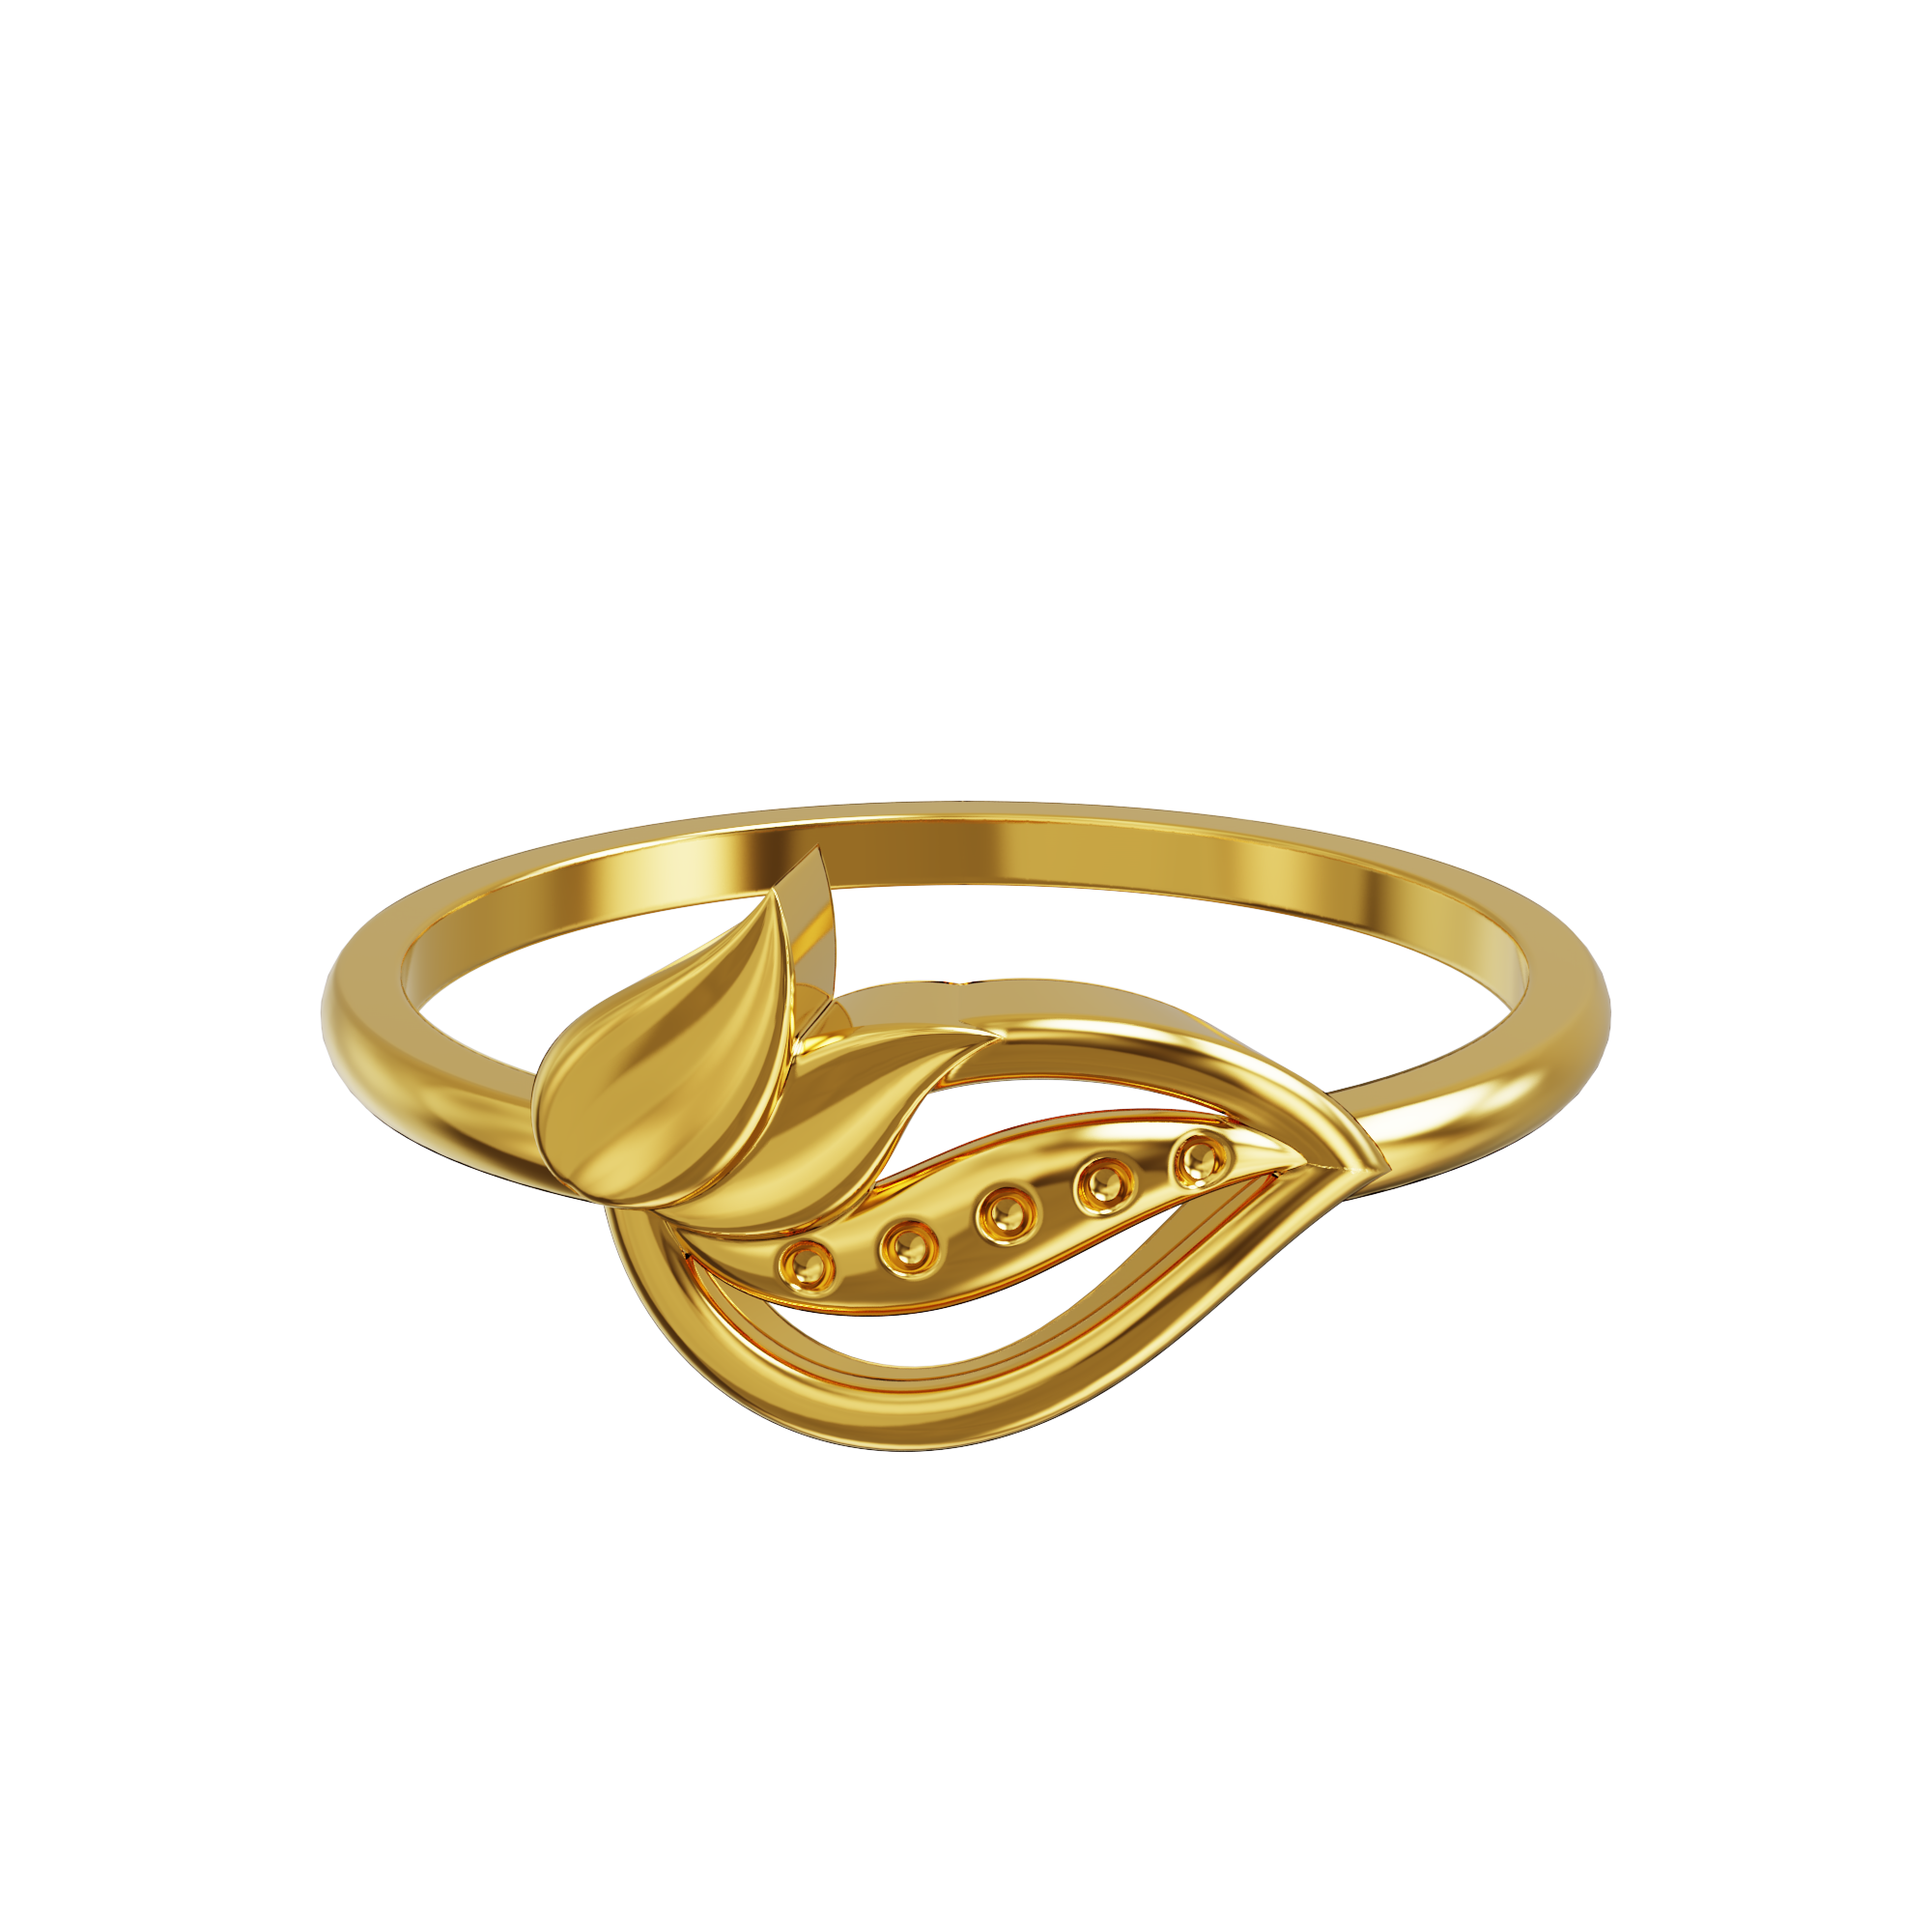 Gold Rings with Stones - 9 Best and New Collection